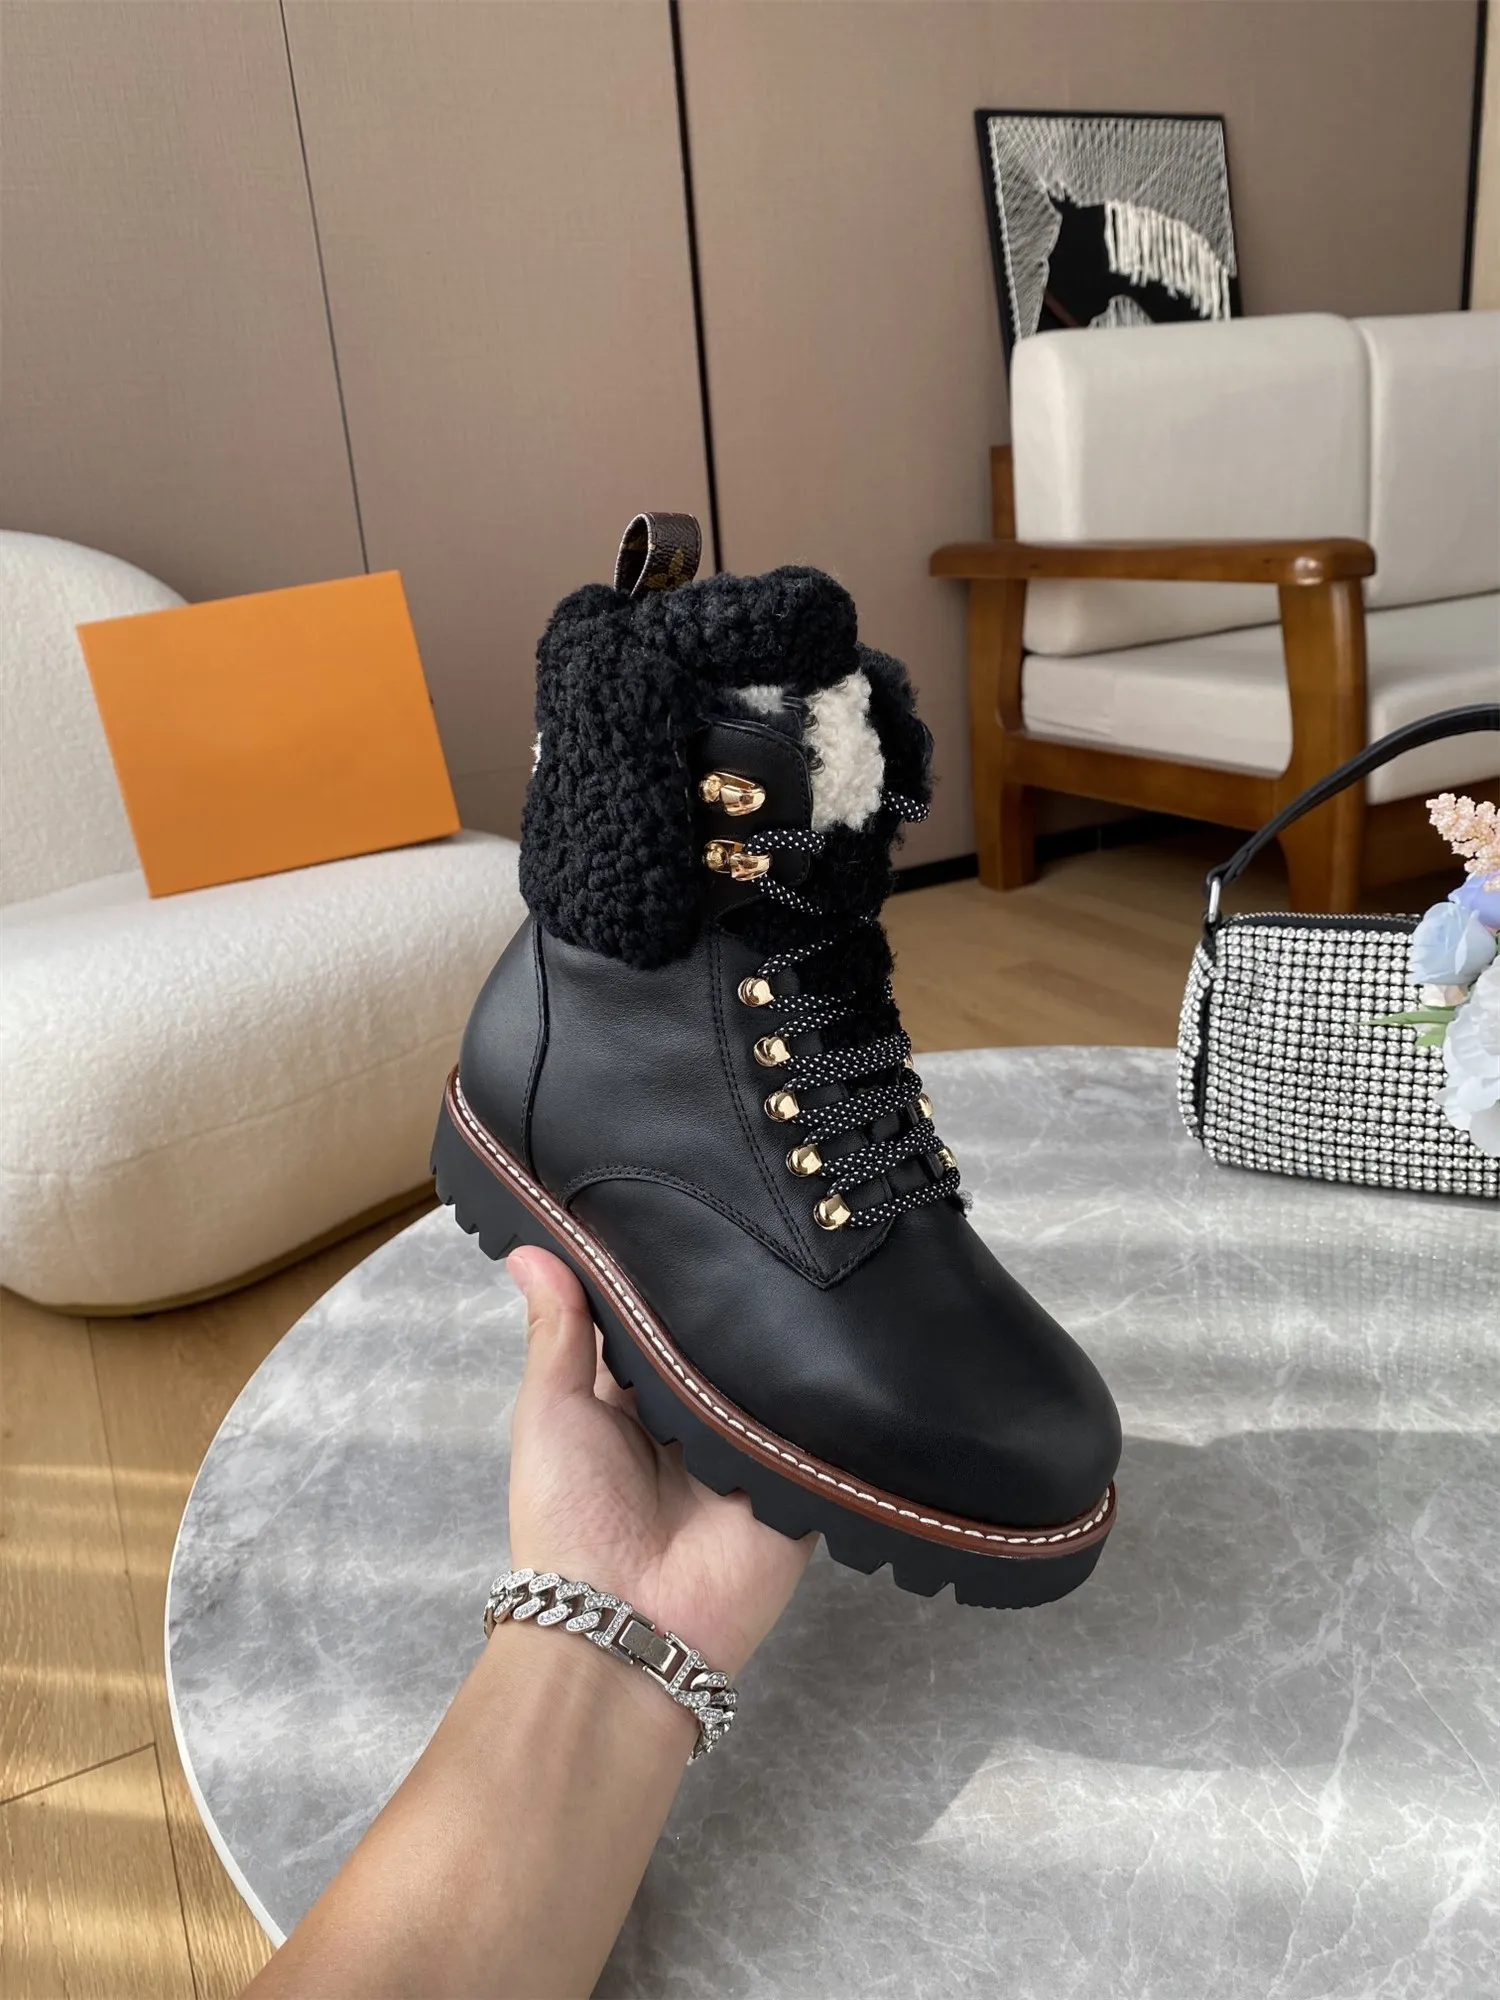 new arrived woman winter short plush martin boots femal flat wave heel casual short shoes size 35-41